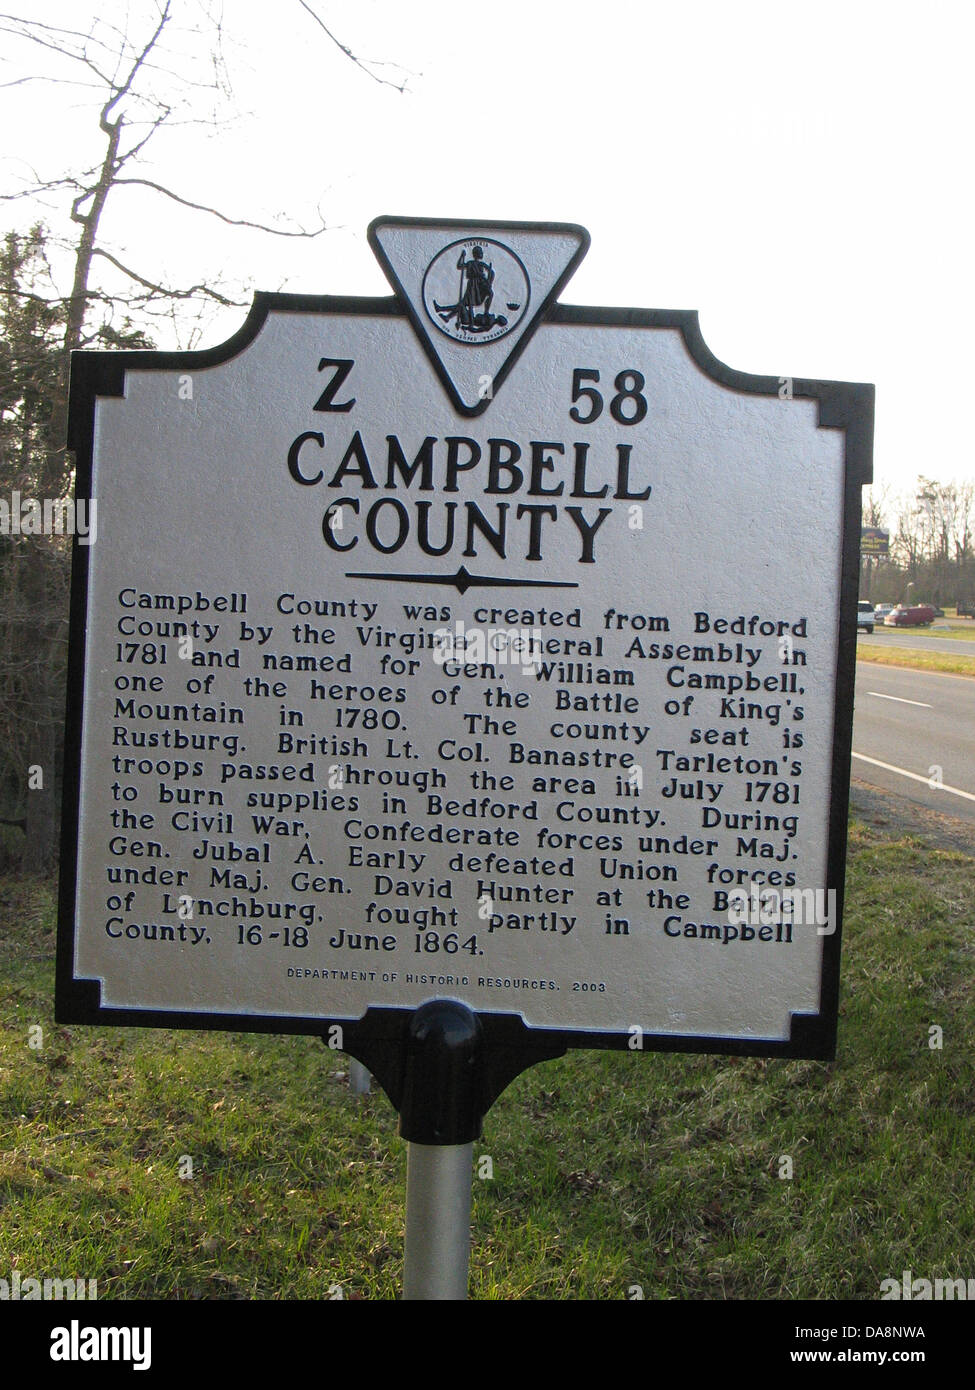 CAMPBELL COUNTY Campbell County was created from Bedford County by the Virginia General Assembly in 1781 and named for Gen. William Campbell, one of the heroes of the Battle of King's Mountain in 1780. The county seat is Rustburg. British Lt. Col. Banastre Tarleton's troops passed through the area in July 1781 to burn supplies in Bedford County. During the Civil War, Confederate forces under Maj. Gen. Jubal A. Early defeated Union forces under Maj. Gen. David Hunter at the Battle of Lynchburg, fought partly in Campbell County, 16-18 June 1864. Department of Historic Resources, 2003 Stock Photo